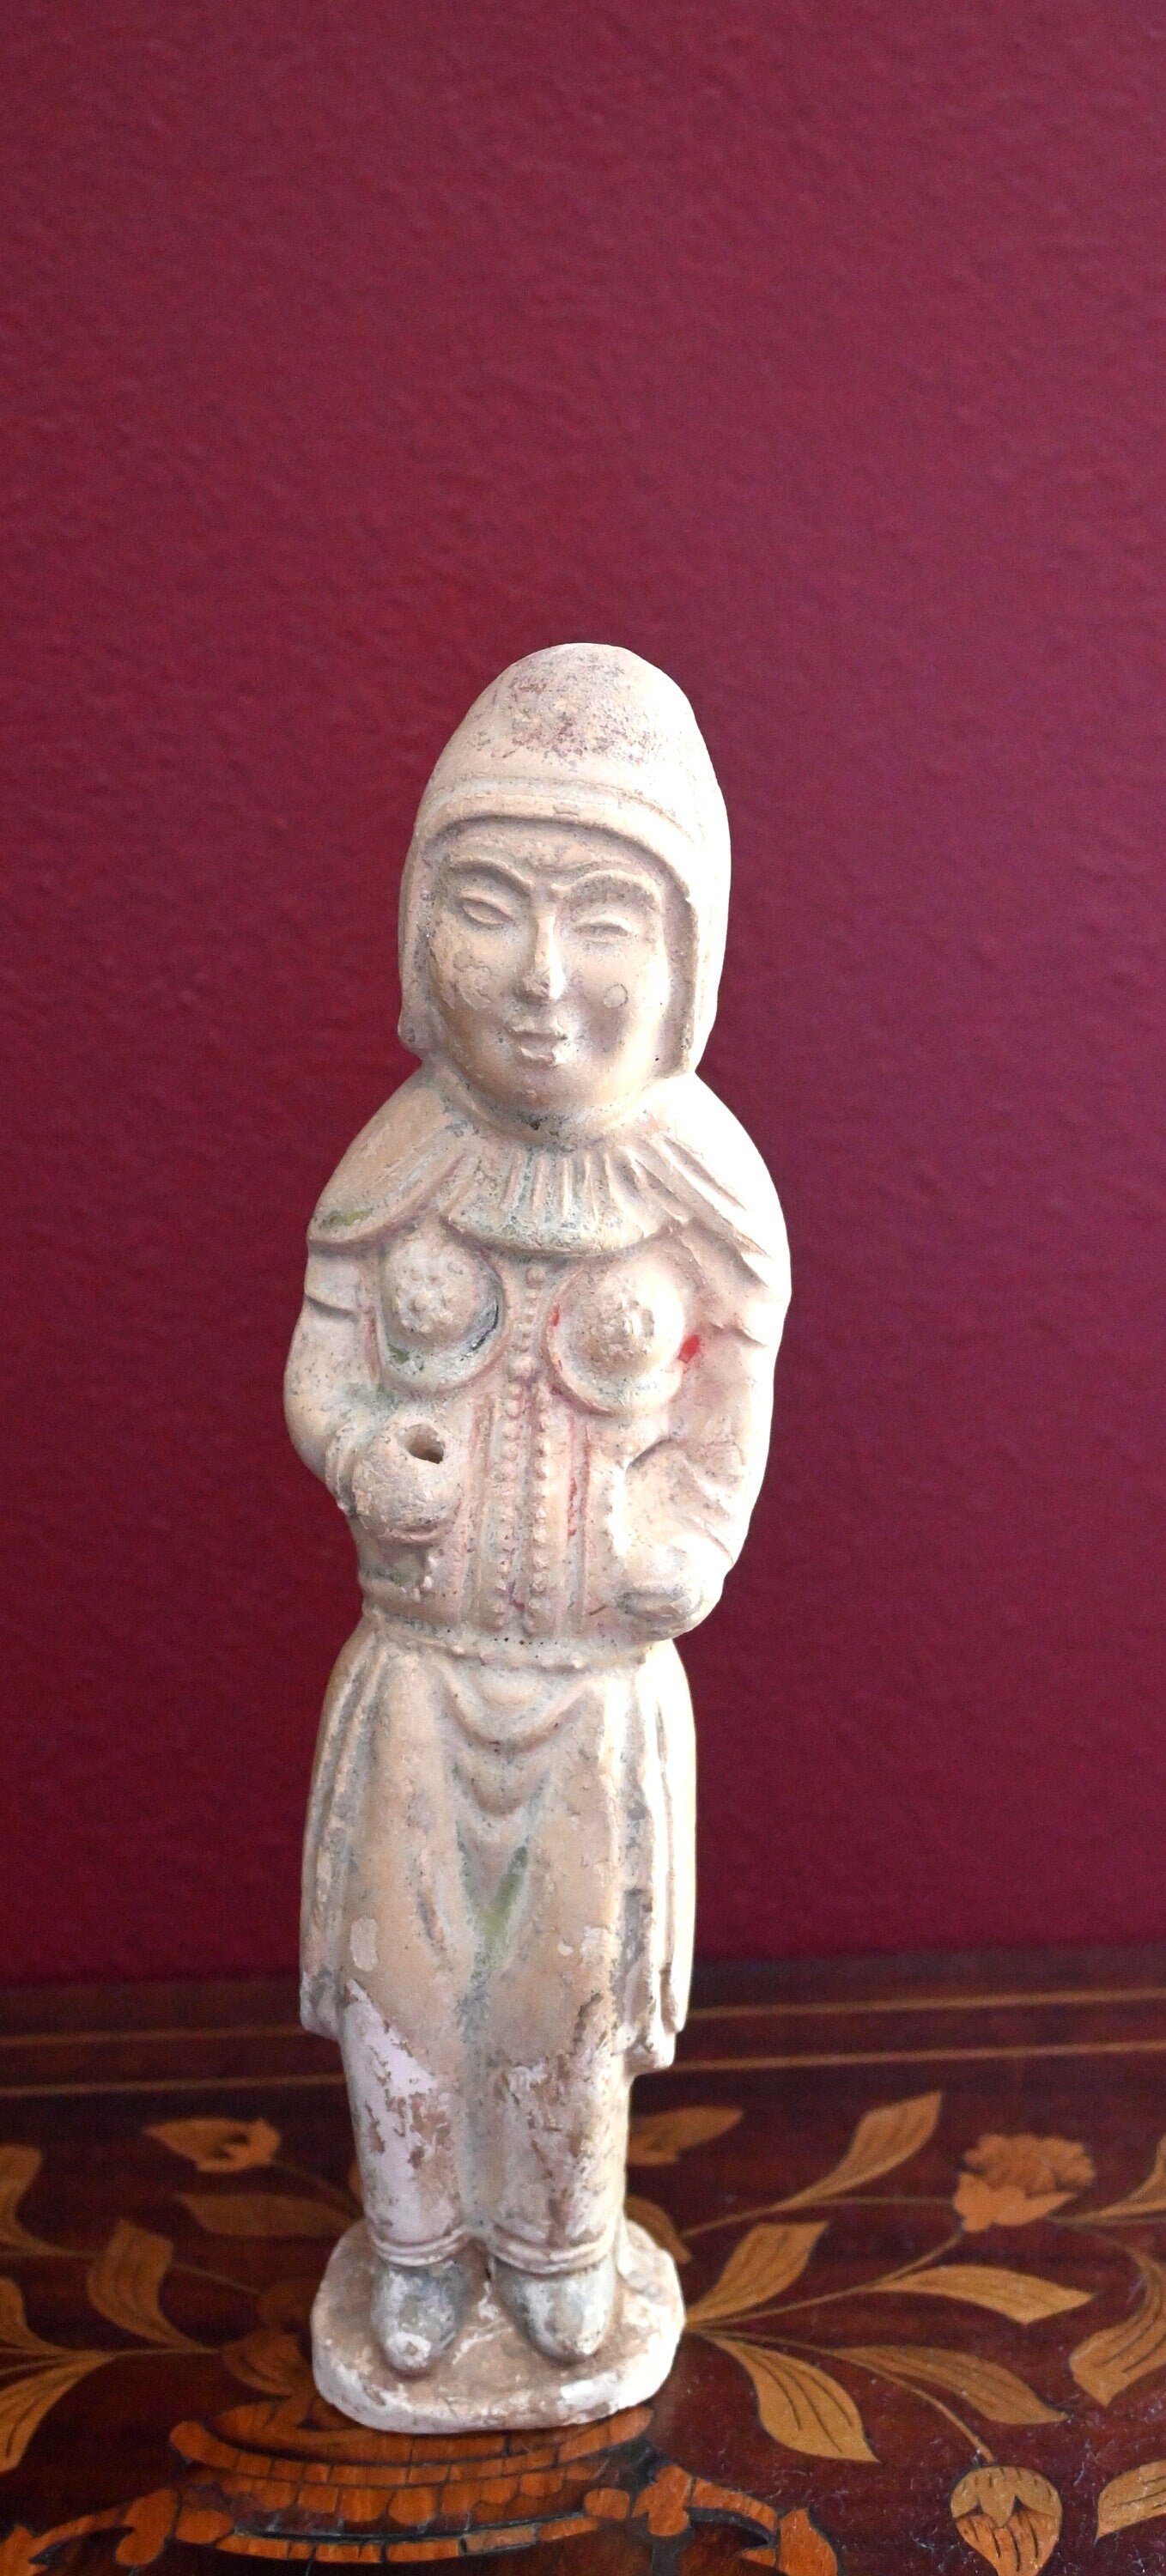 Ancient Tang Dynasty Pottery Warrior 618-907 AD -Authentic Artifact with COA Excellent condition